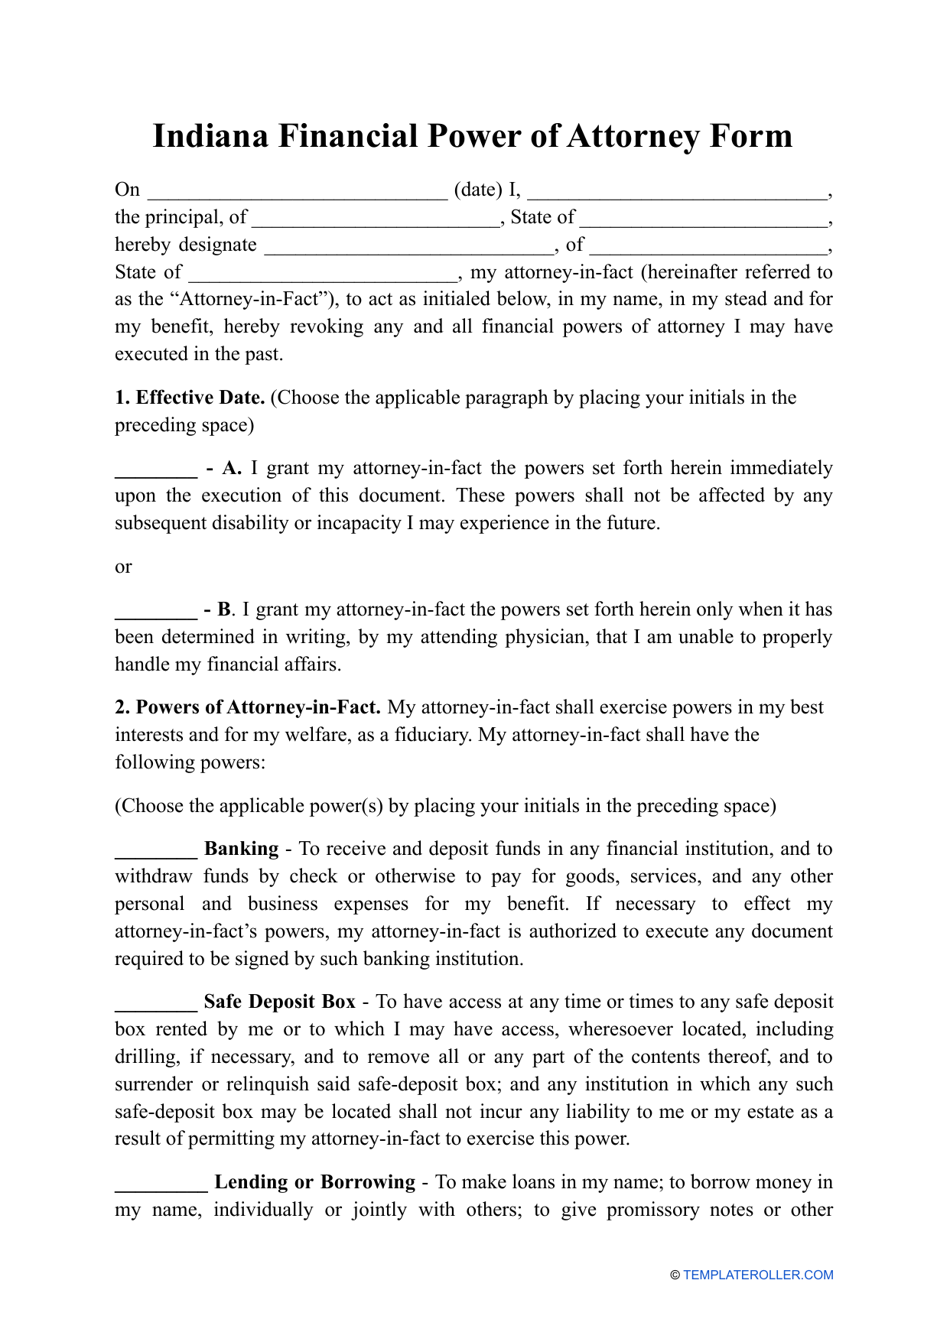 Financial Power of Attorney Form - Indiana, Page 1